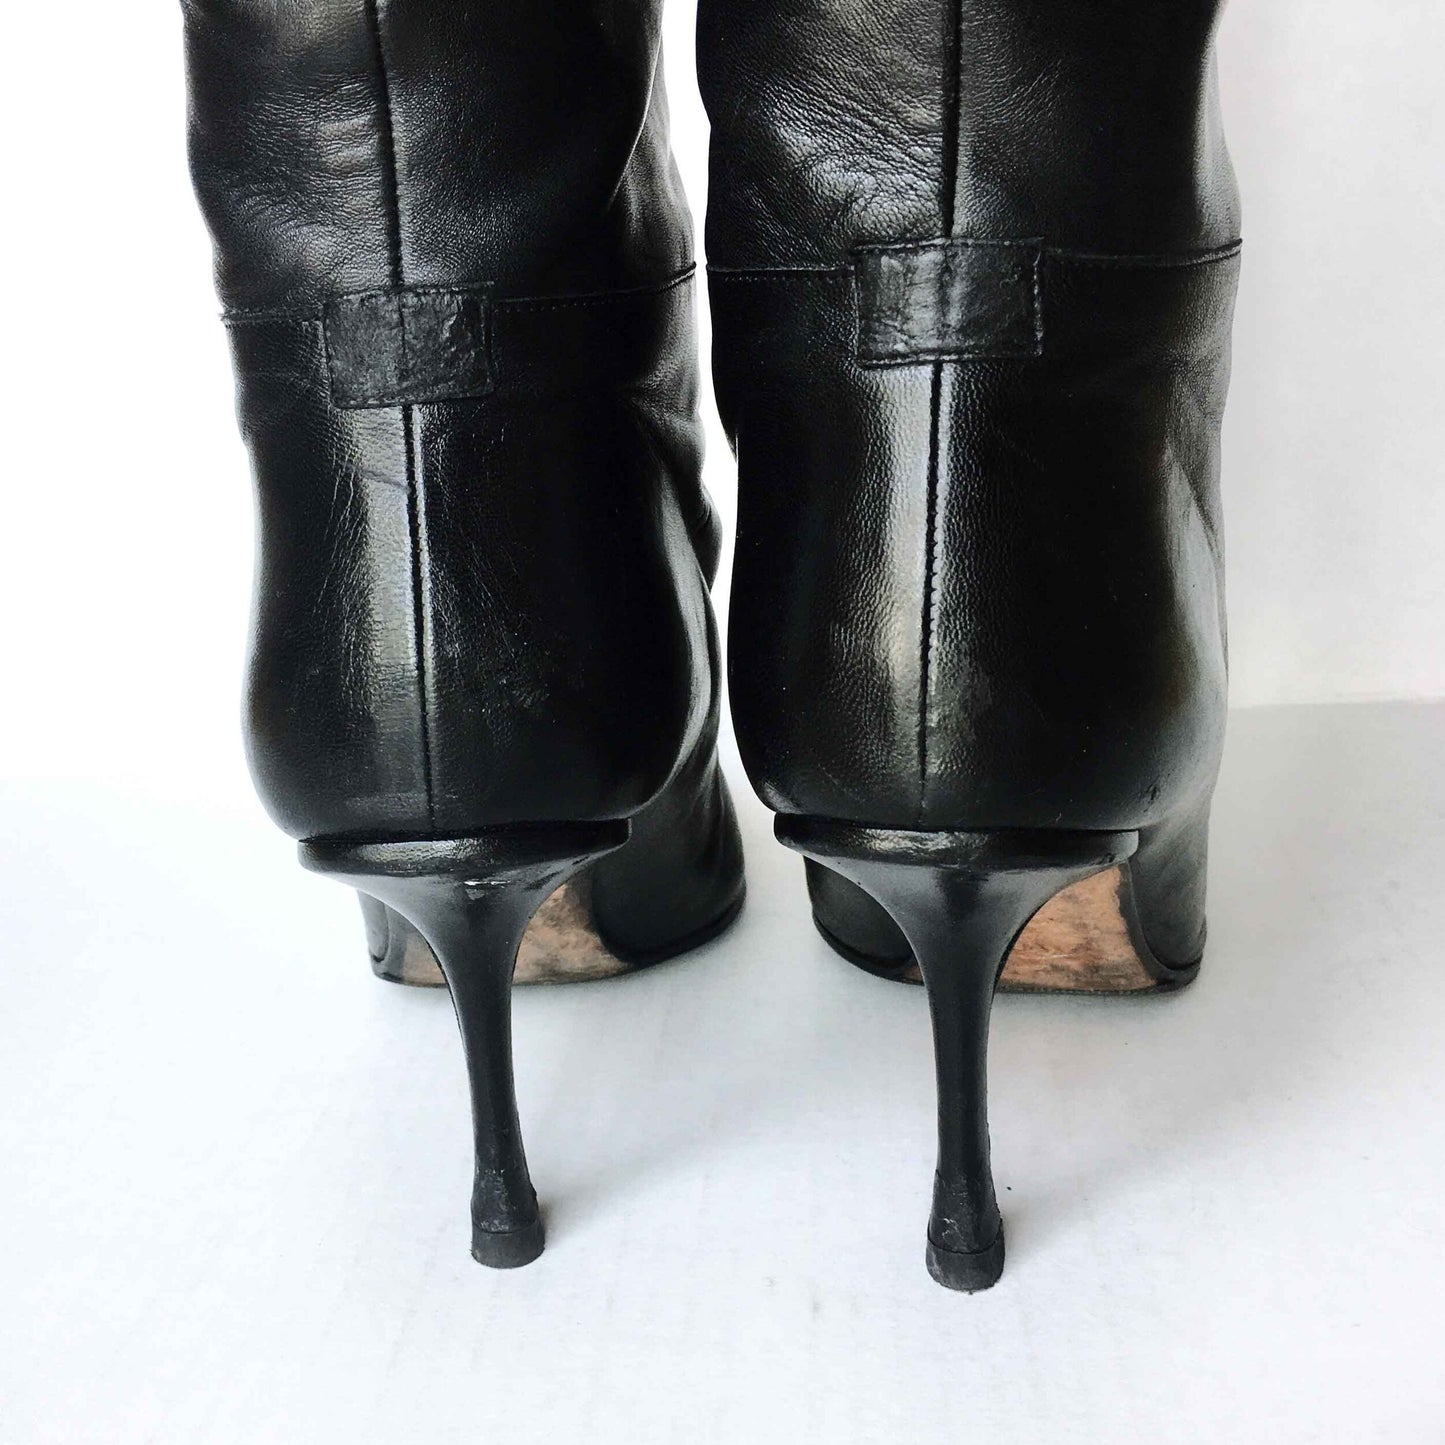 Jimmy Choo pointed toe tall leather boots - size 40